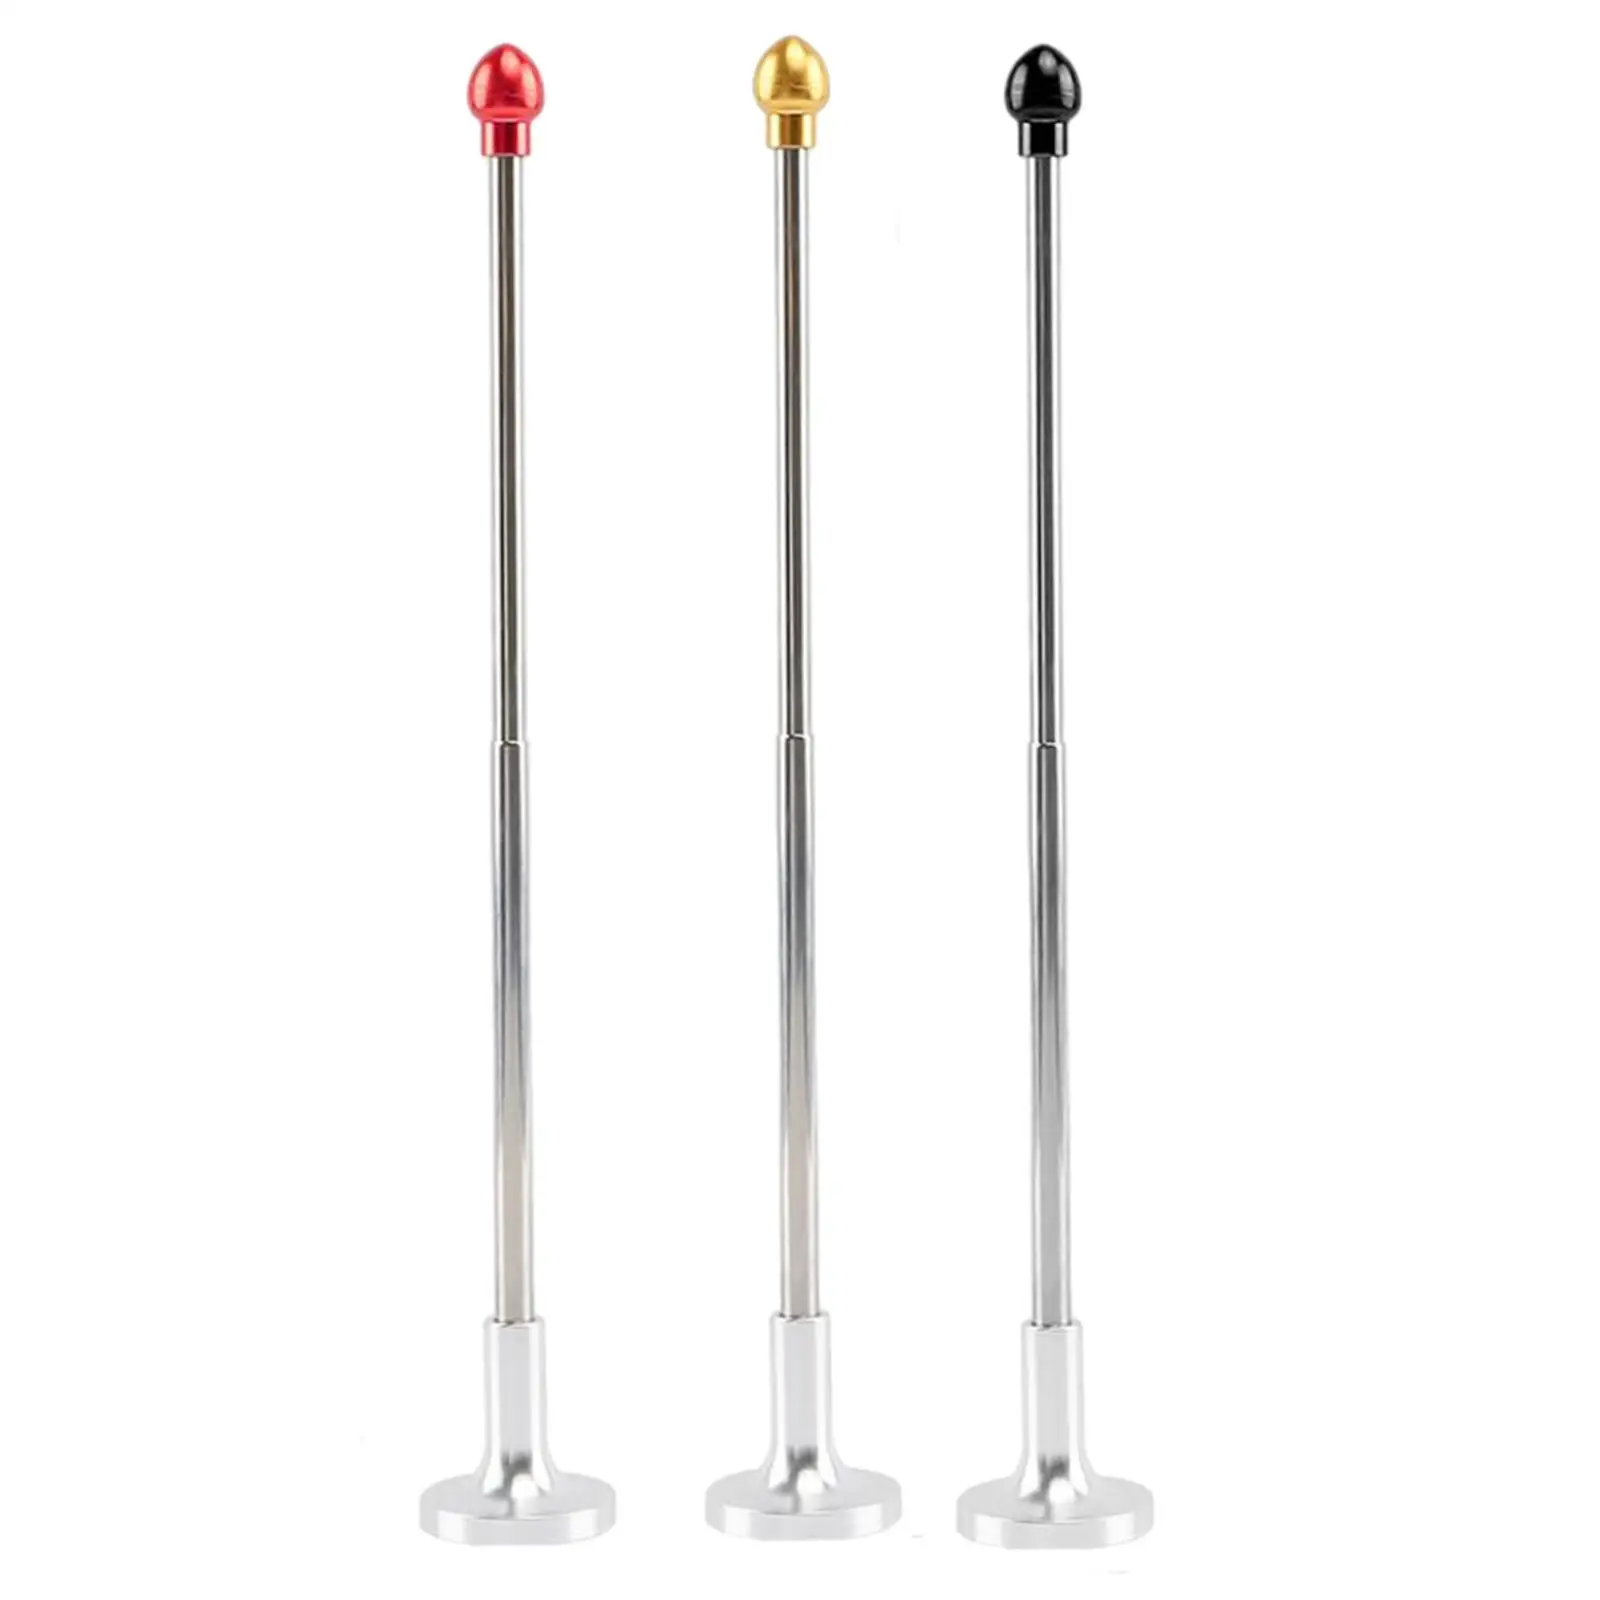 Magnetic Golf Club Alignment Help Visualize Golf Gift Golf Training Tool